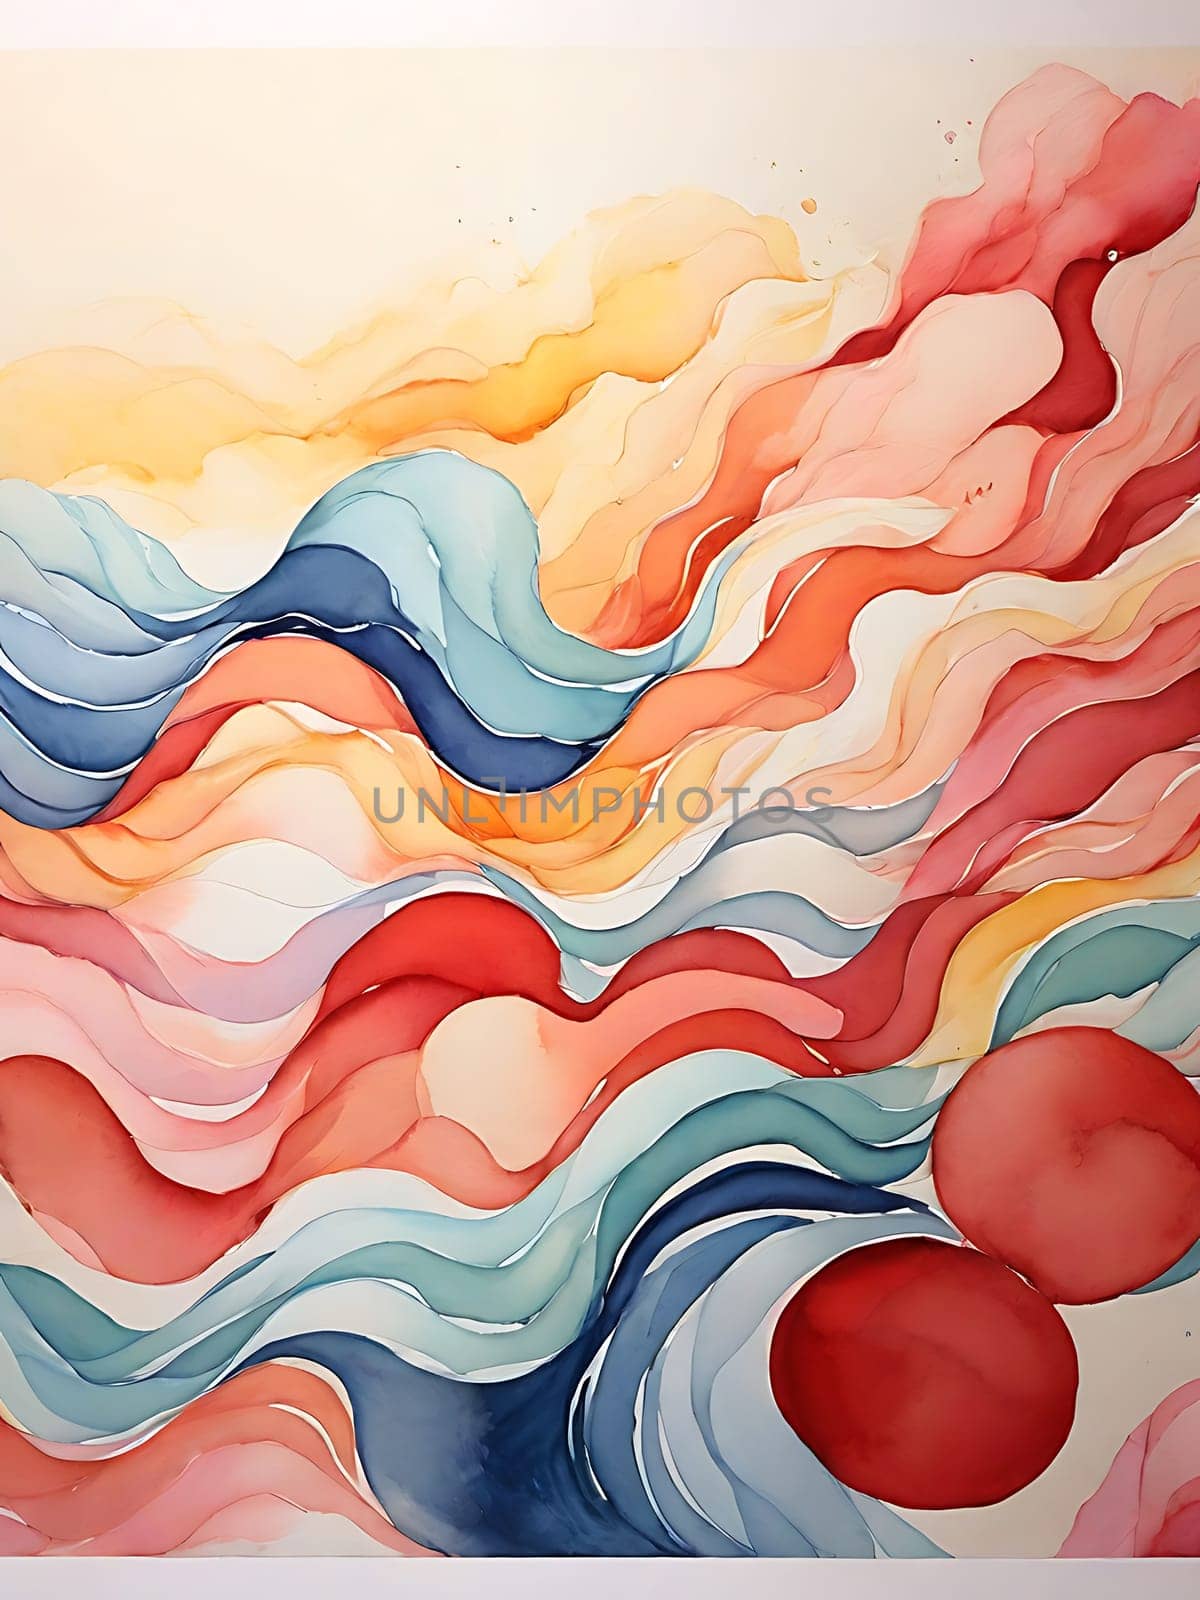 Witness the awe-inspiring beauty and power of nature in this vibrant painting of a colorful wave.